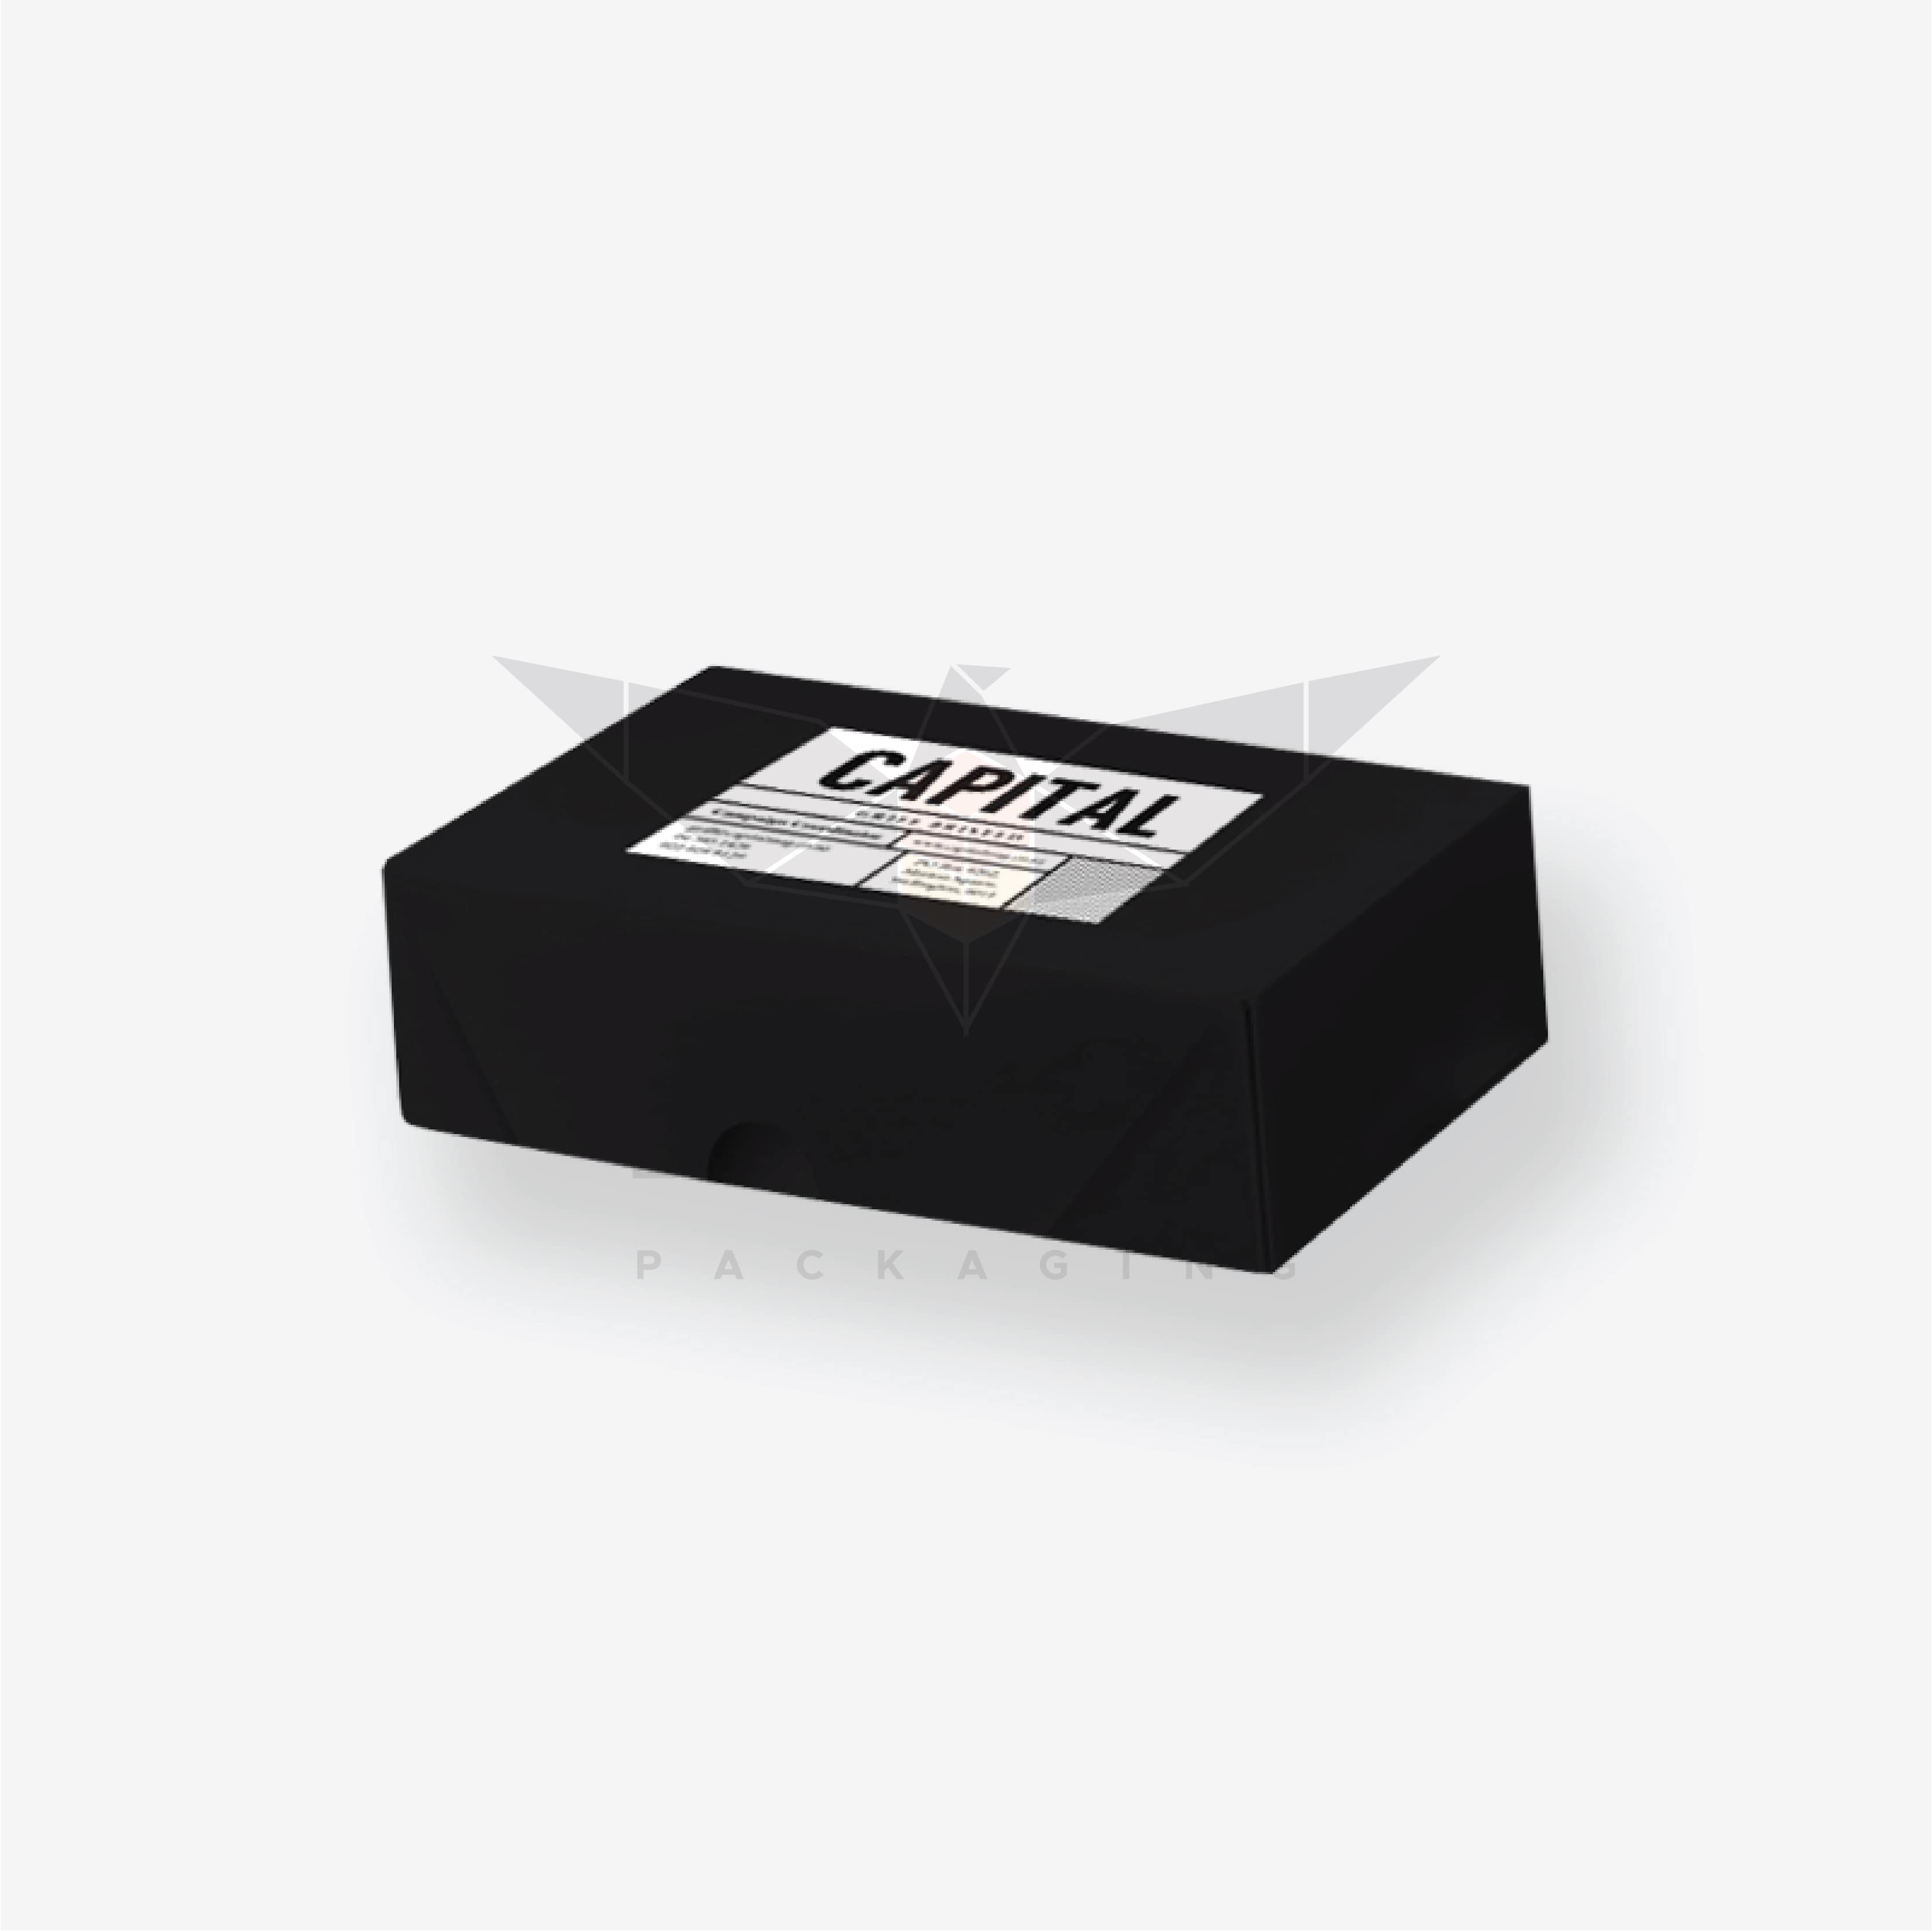 Custom Printed Business Card Boxes